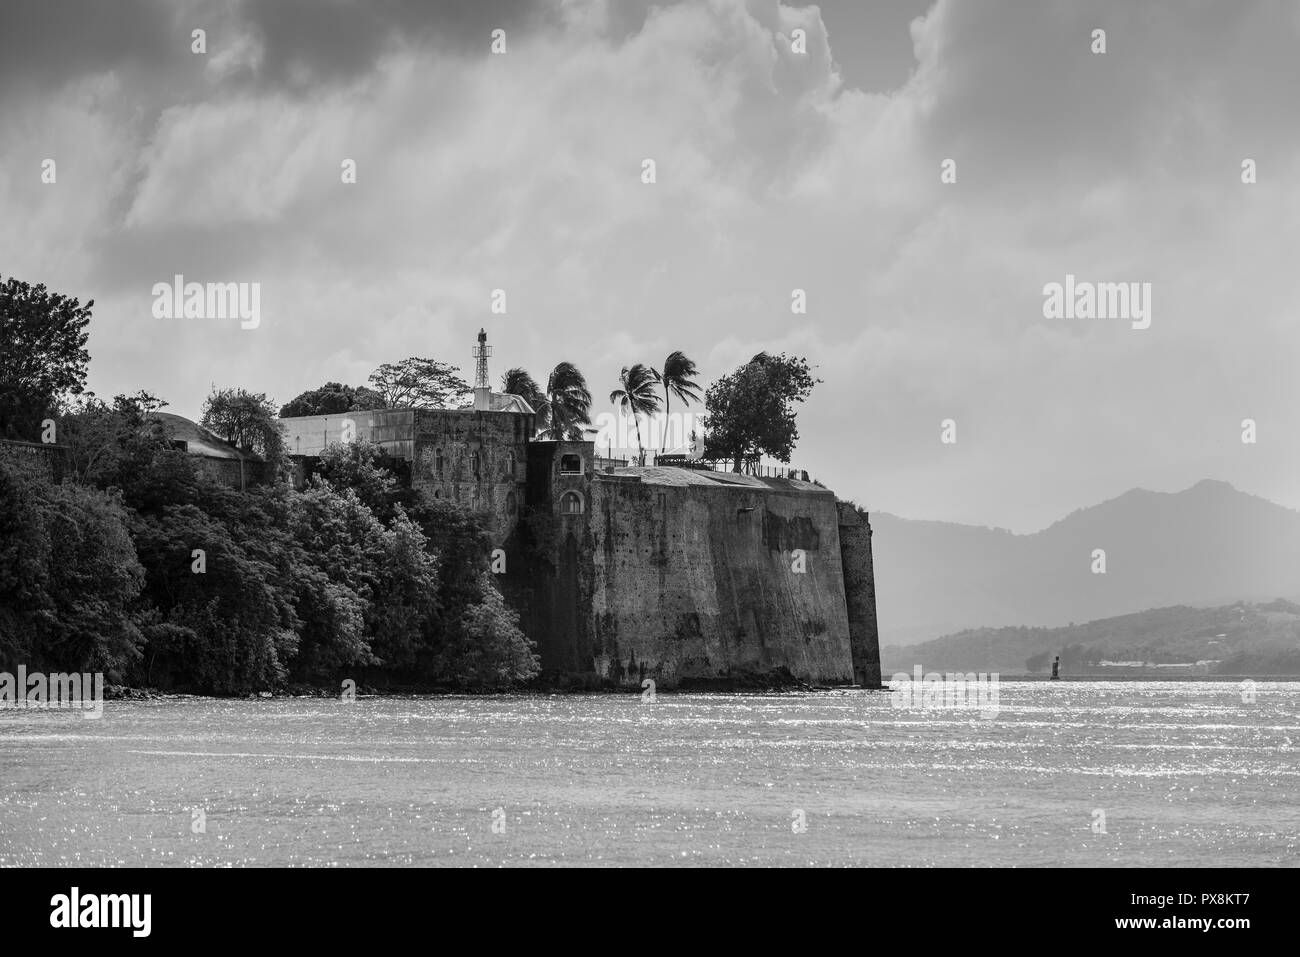 Fort Saint Louis in Fort-de-France Bay, Martinique, West Indies, French Caribbean. Black and white photography. Stock Photo